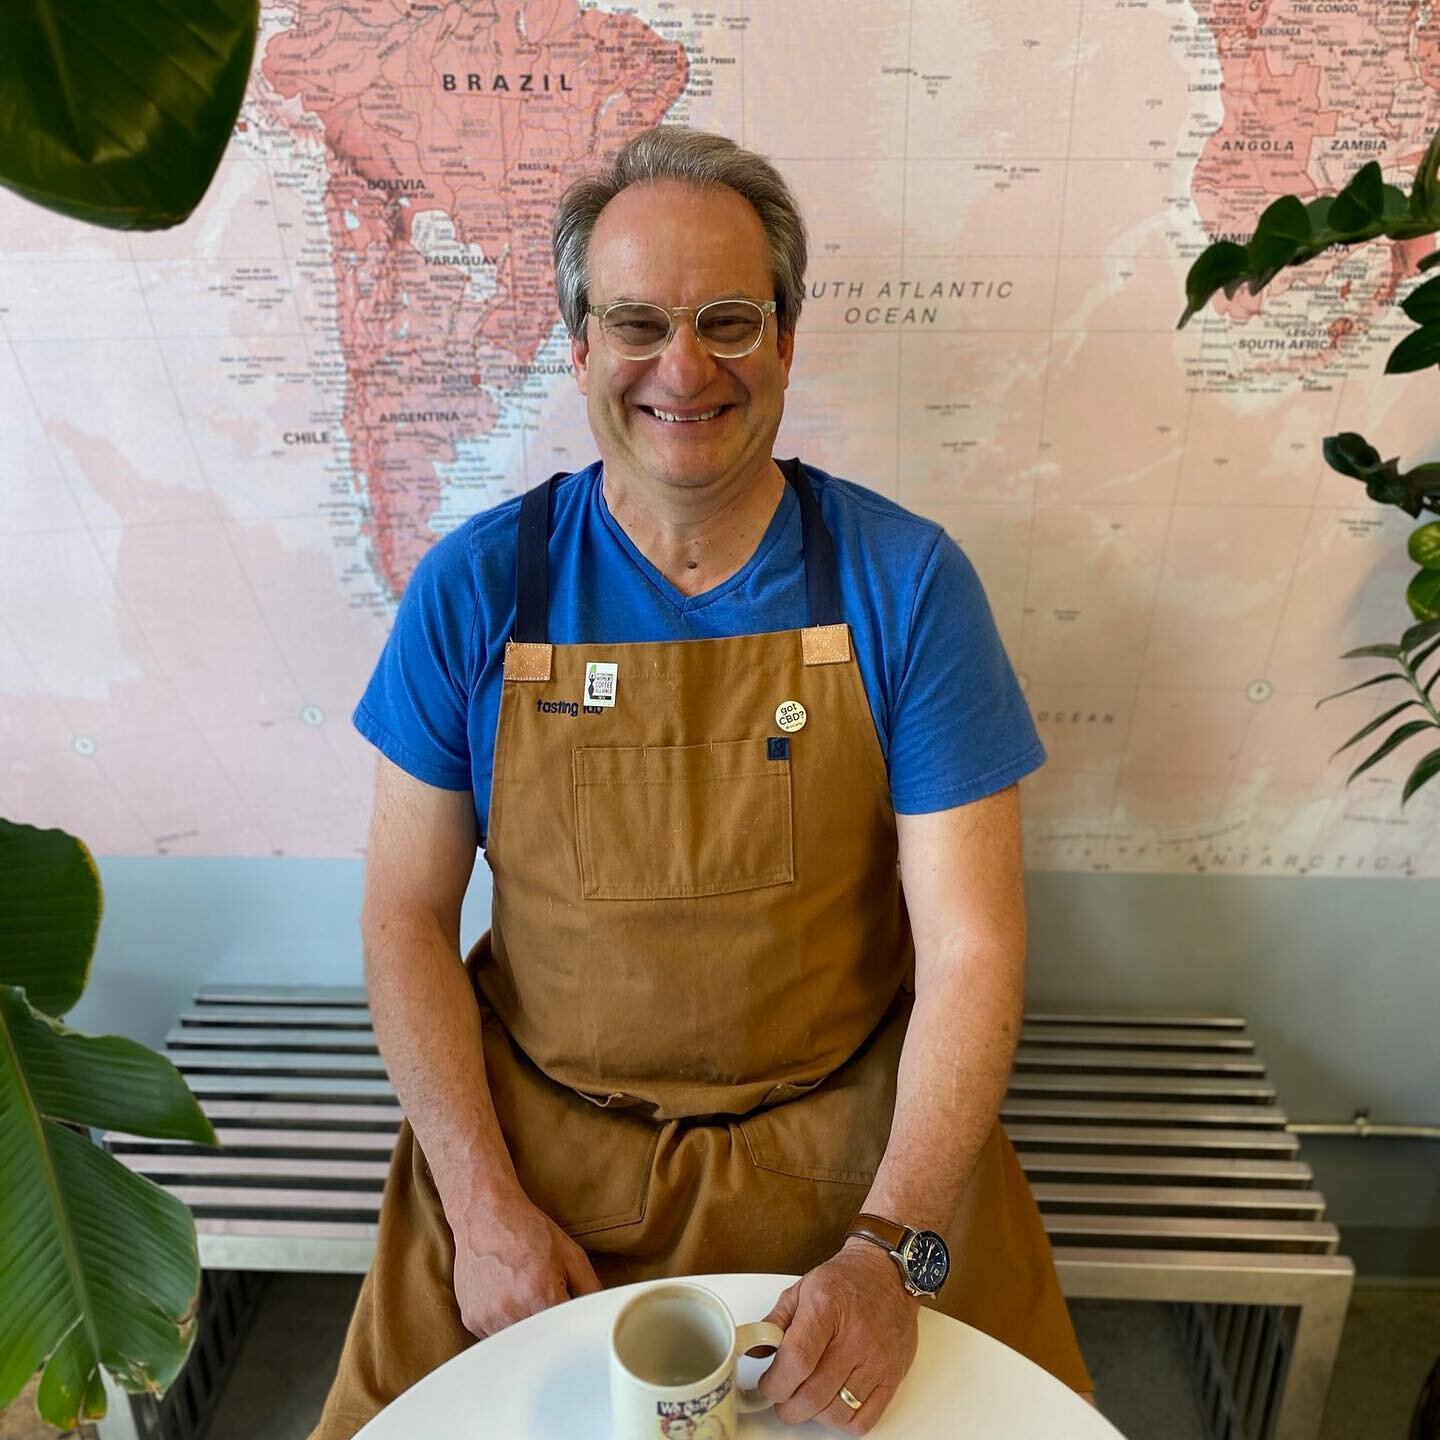 New year, new coffee! Start your year off as happy as Dan by getting our new Dominican Republic! You will love this medium roast with tasting notes of peach, lemonade and pomegranate. Happy New Year!

#coloradocoffee #coloradoroaster #bouldercoffee #